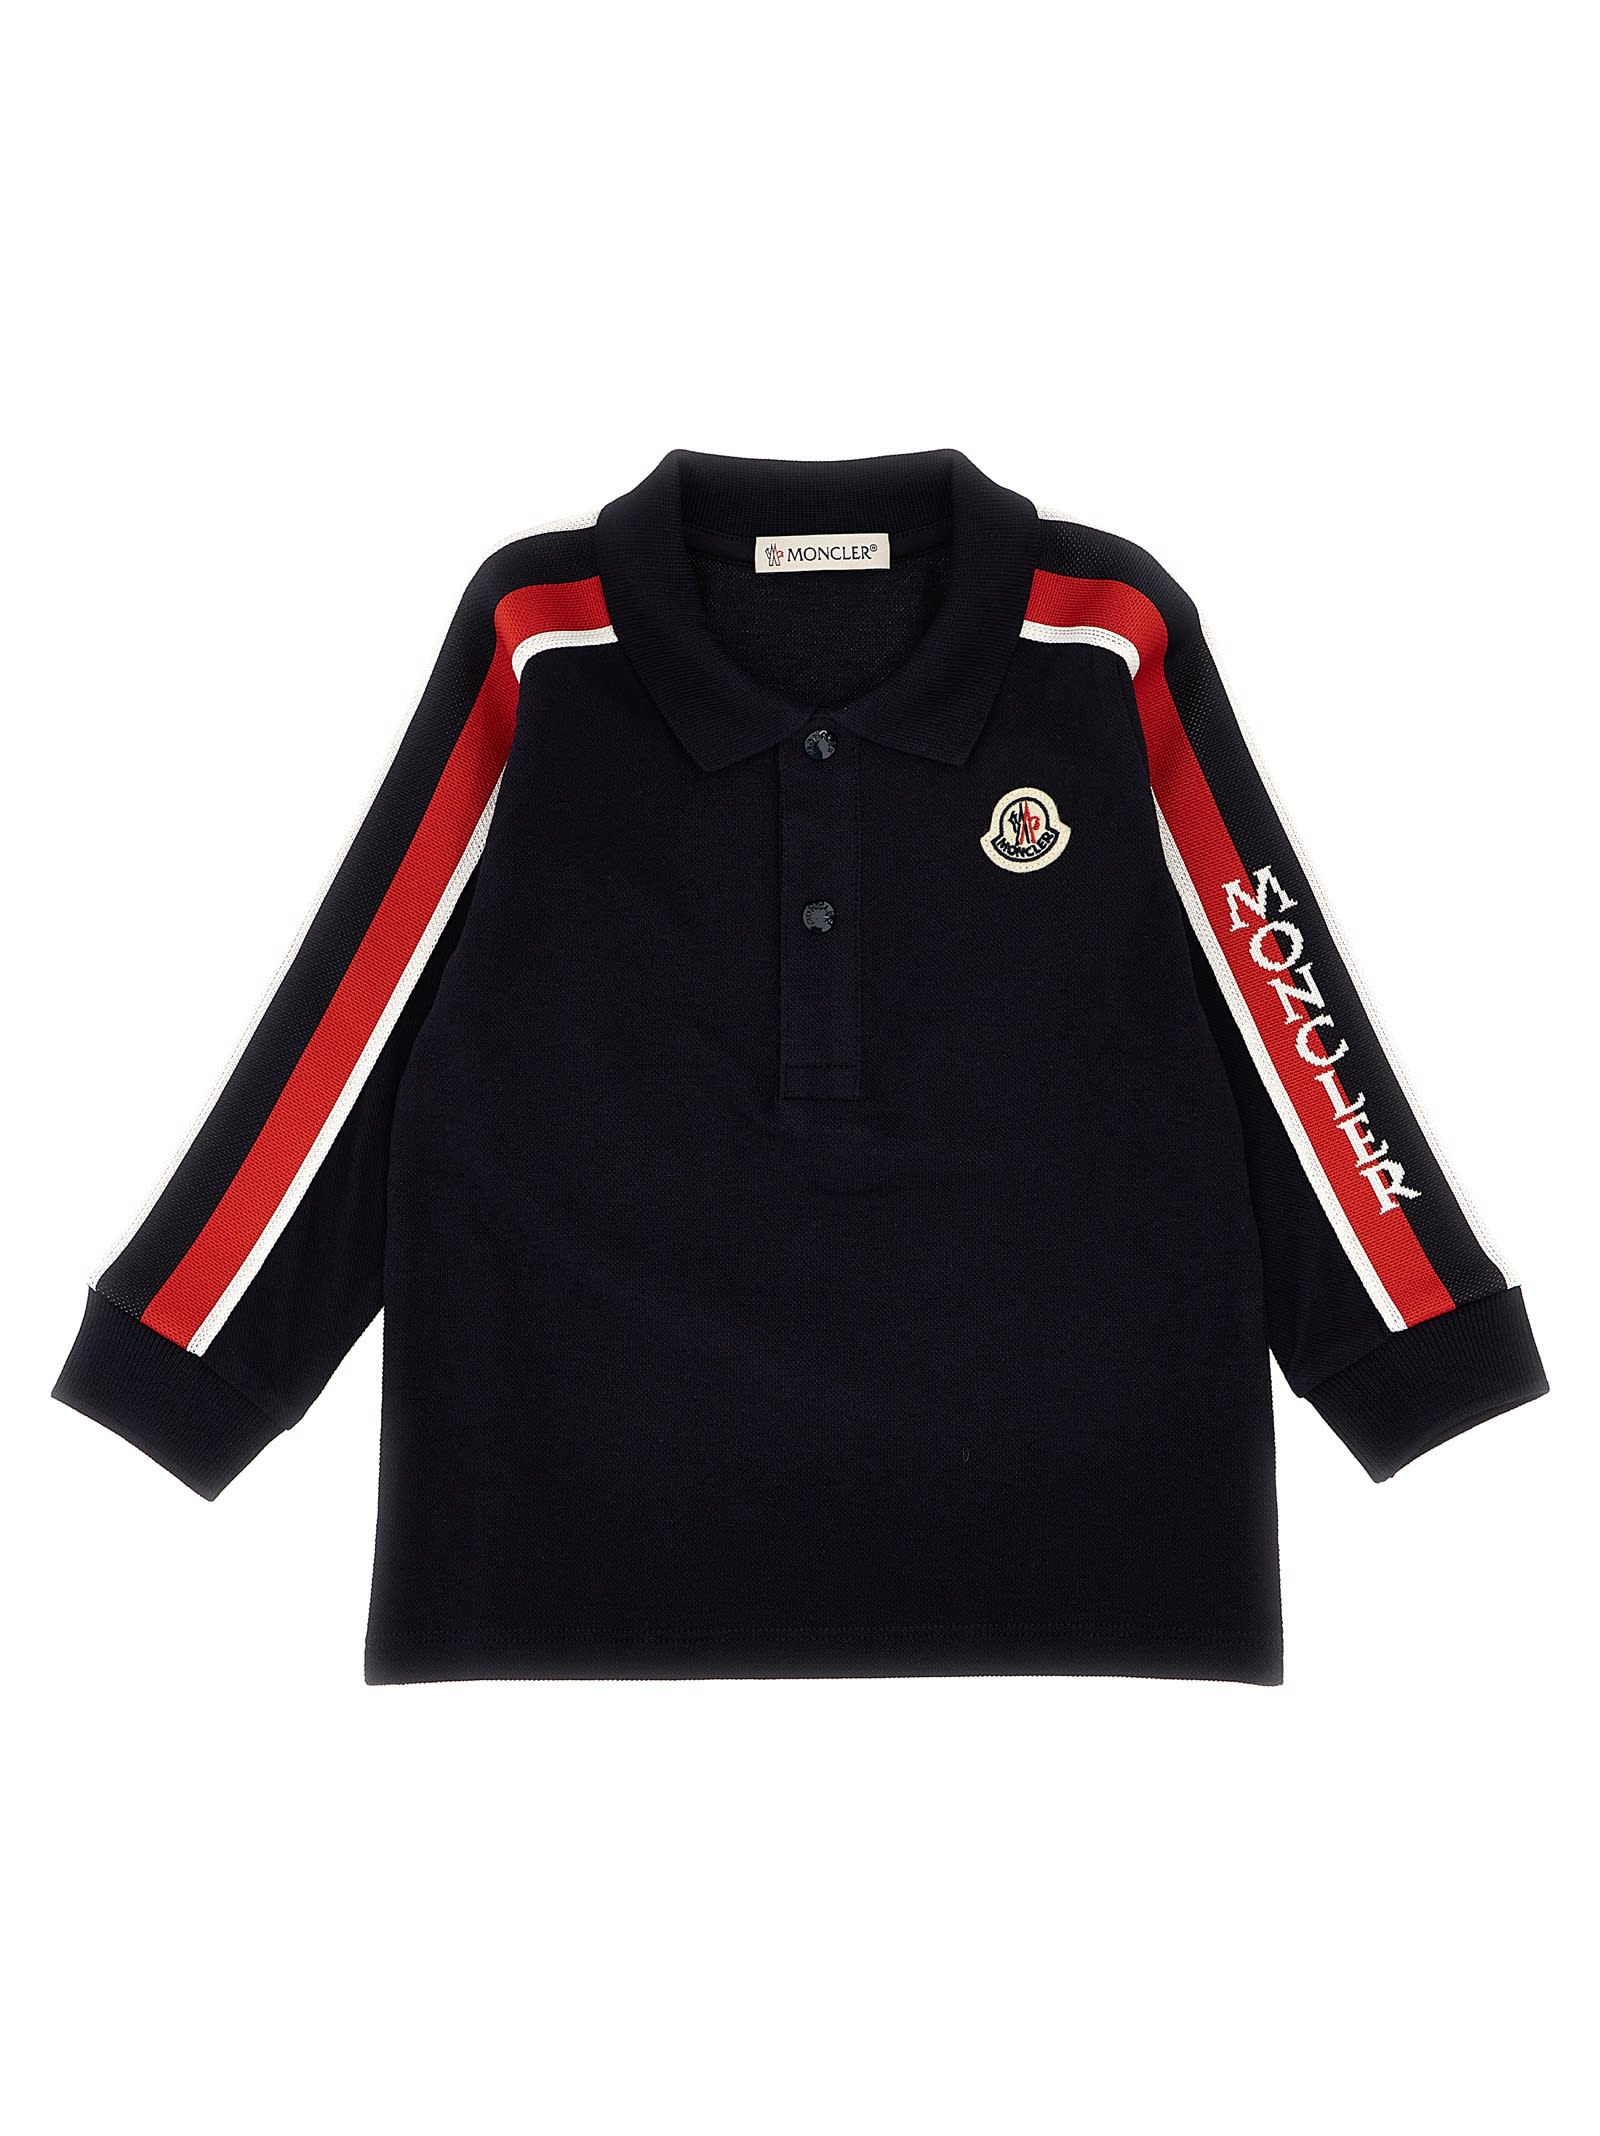 Moncler Polo Contrasting Bands